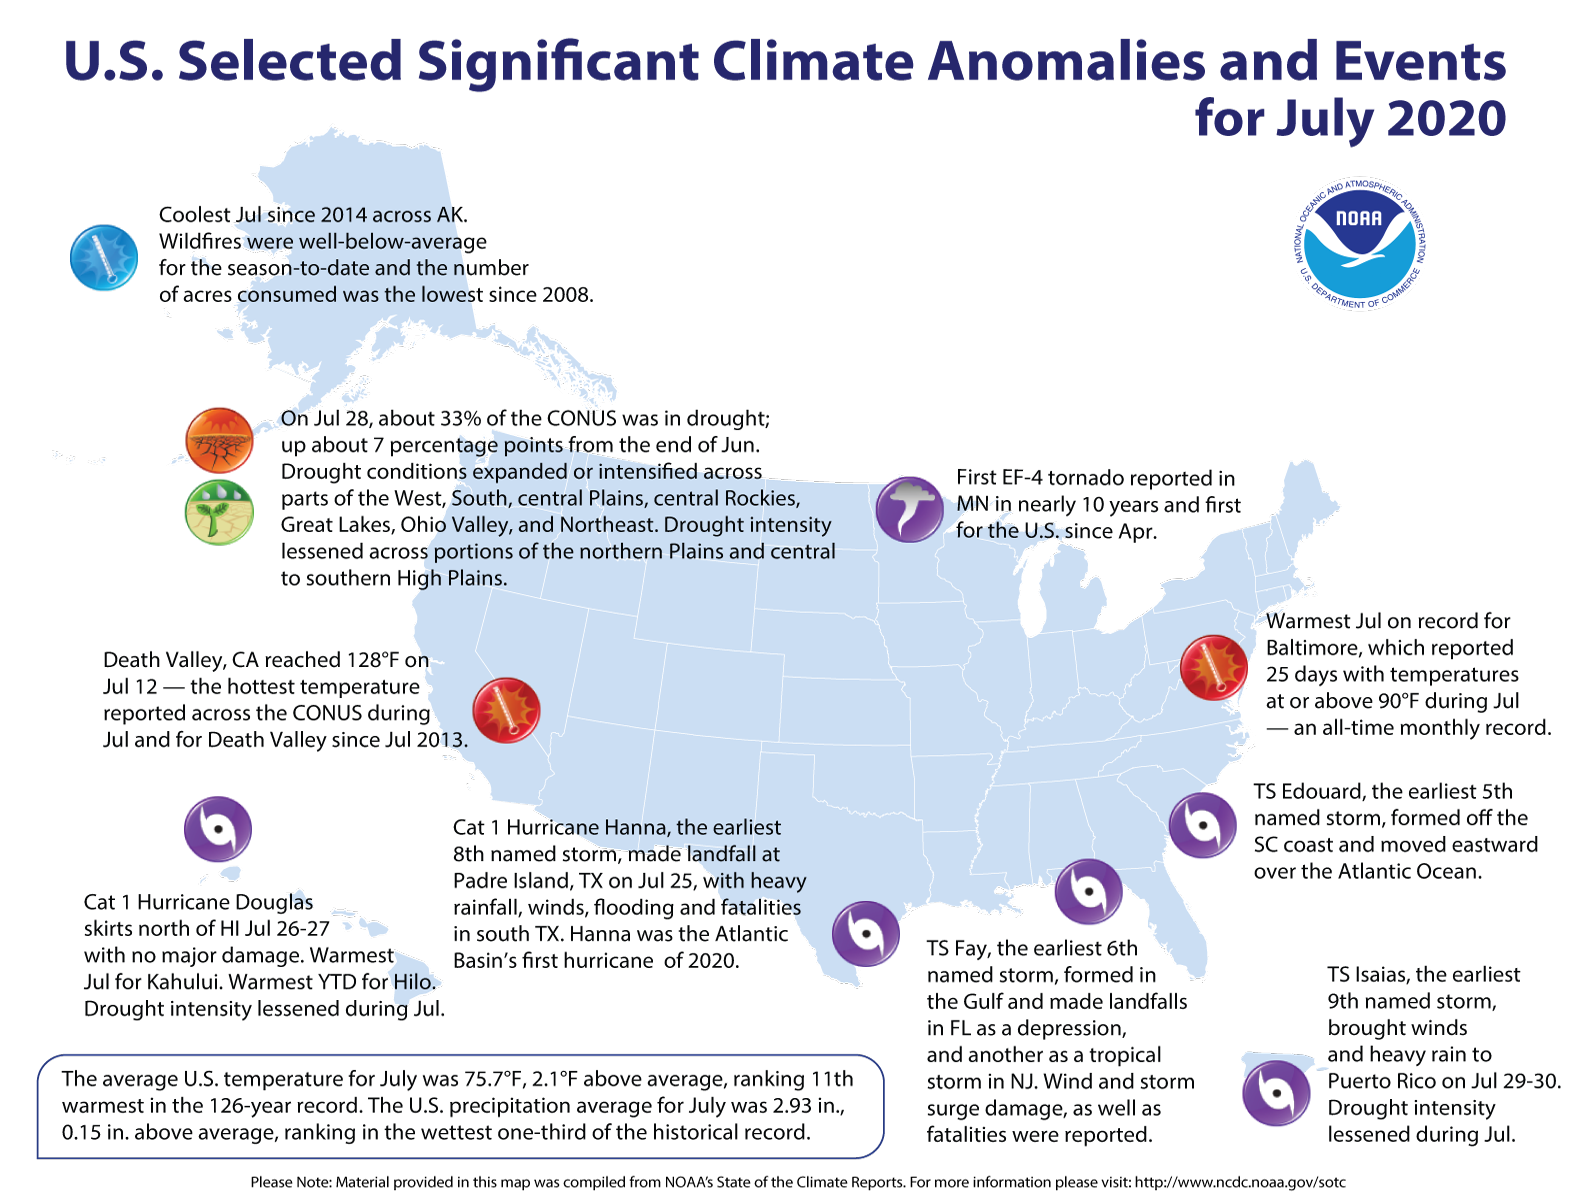 An annotated map of the United States showing notable climate and weather events that occurred across the country during July 2020. For text details, please visit http://bit.ly/USClimate202007.